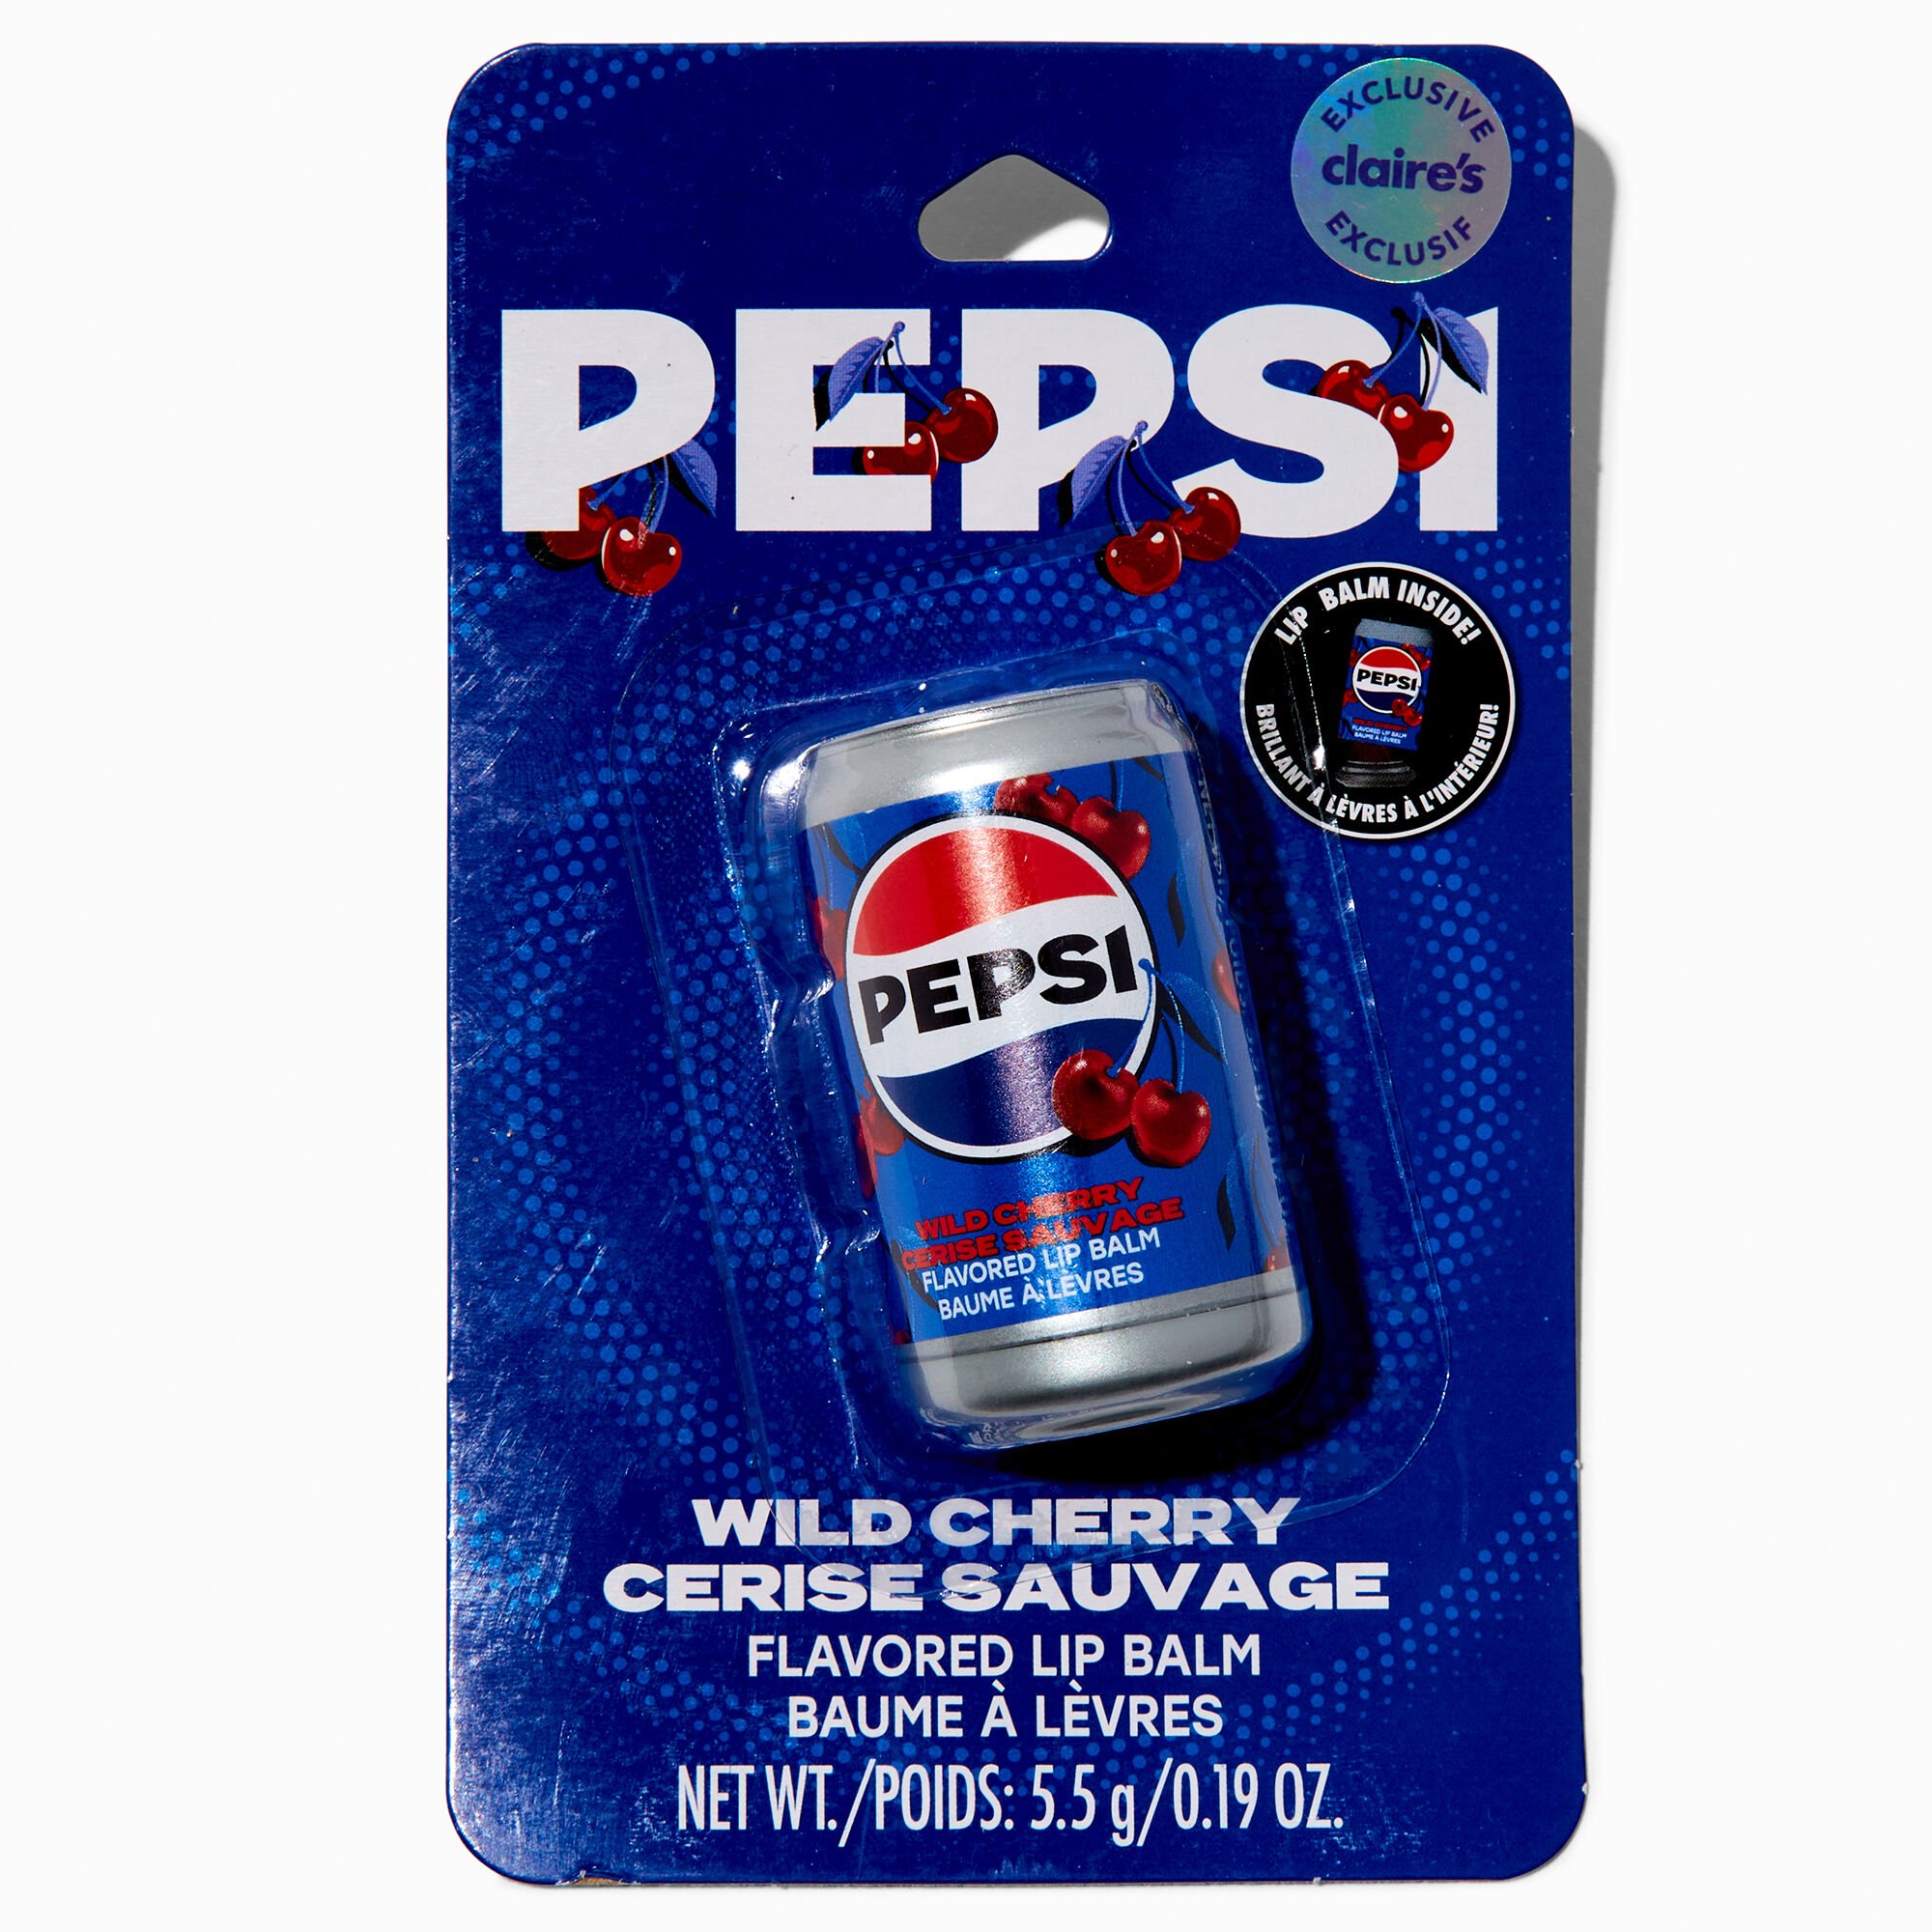 View Pepsi Claires Exclusive Flavored Lip Balm information